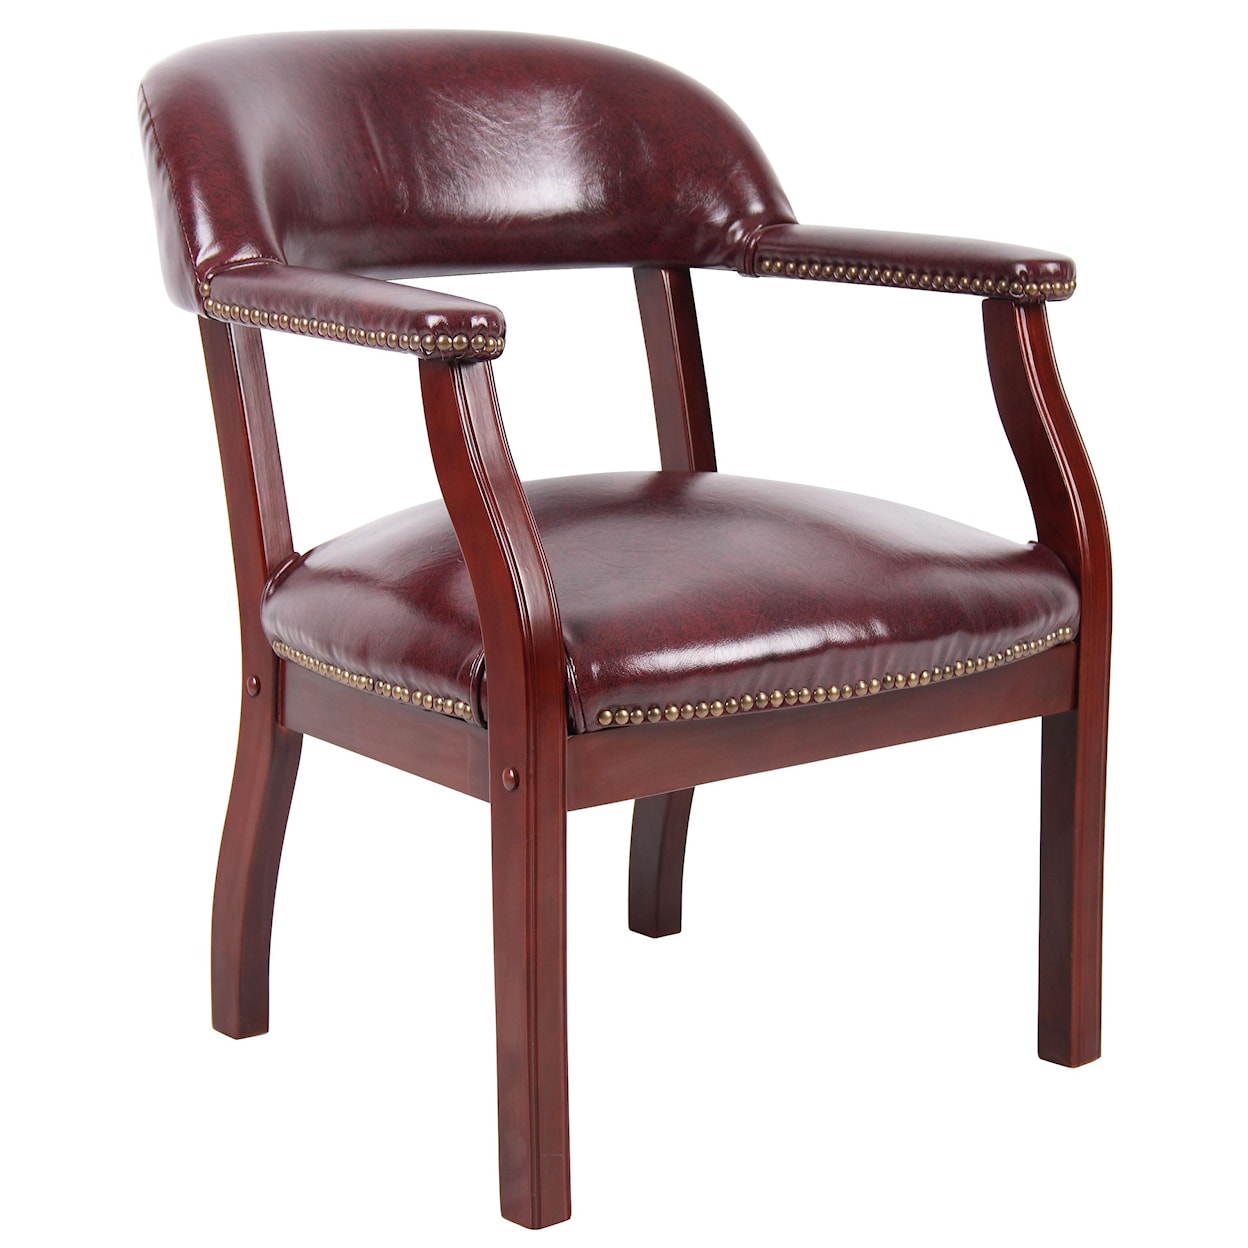 Presidential Seating Office Side Chairs Upholstered Guest Chair